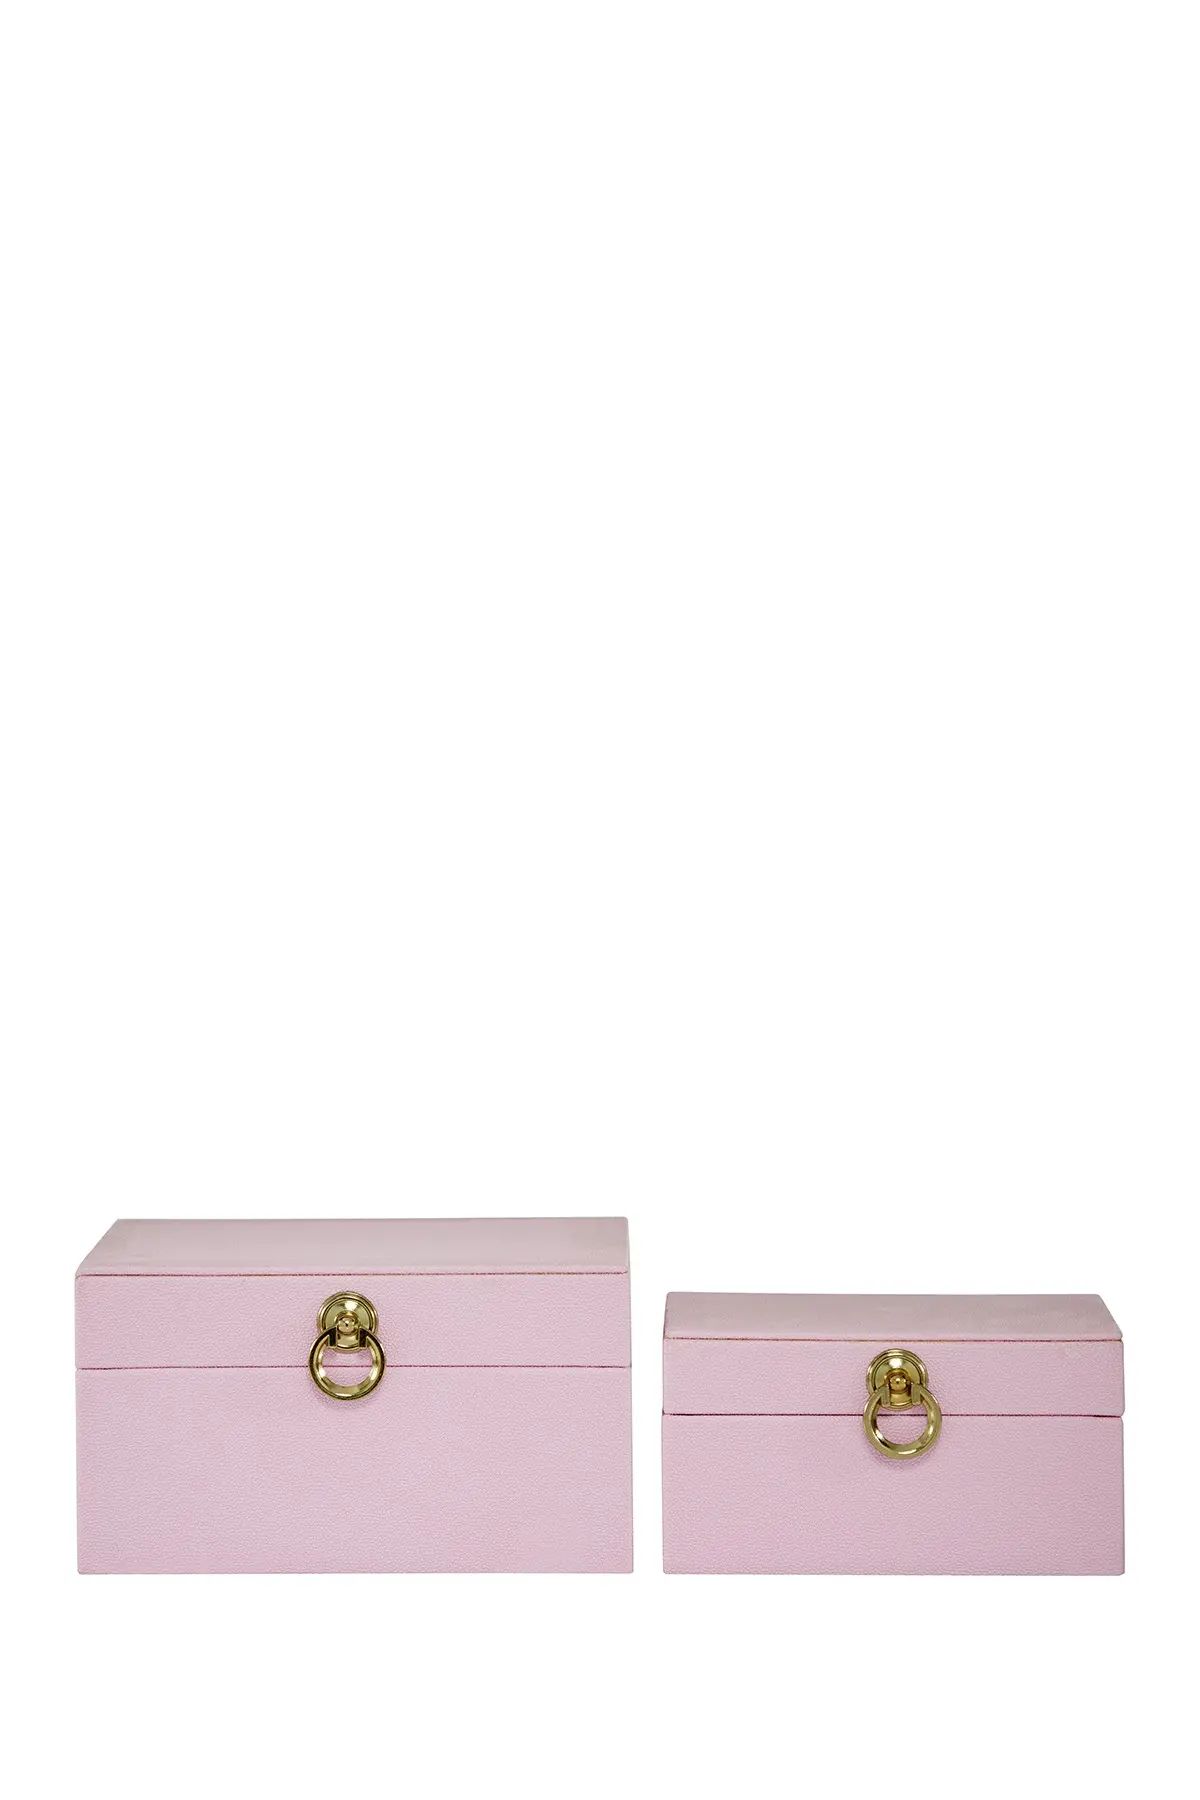 CosmoLiving by Cosmopolitan | Rectangular Pink Faux Shagreen Wood Box With Gold Metal Ring Fixtur... | Nordstrom Rack